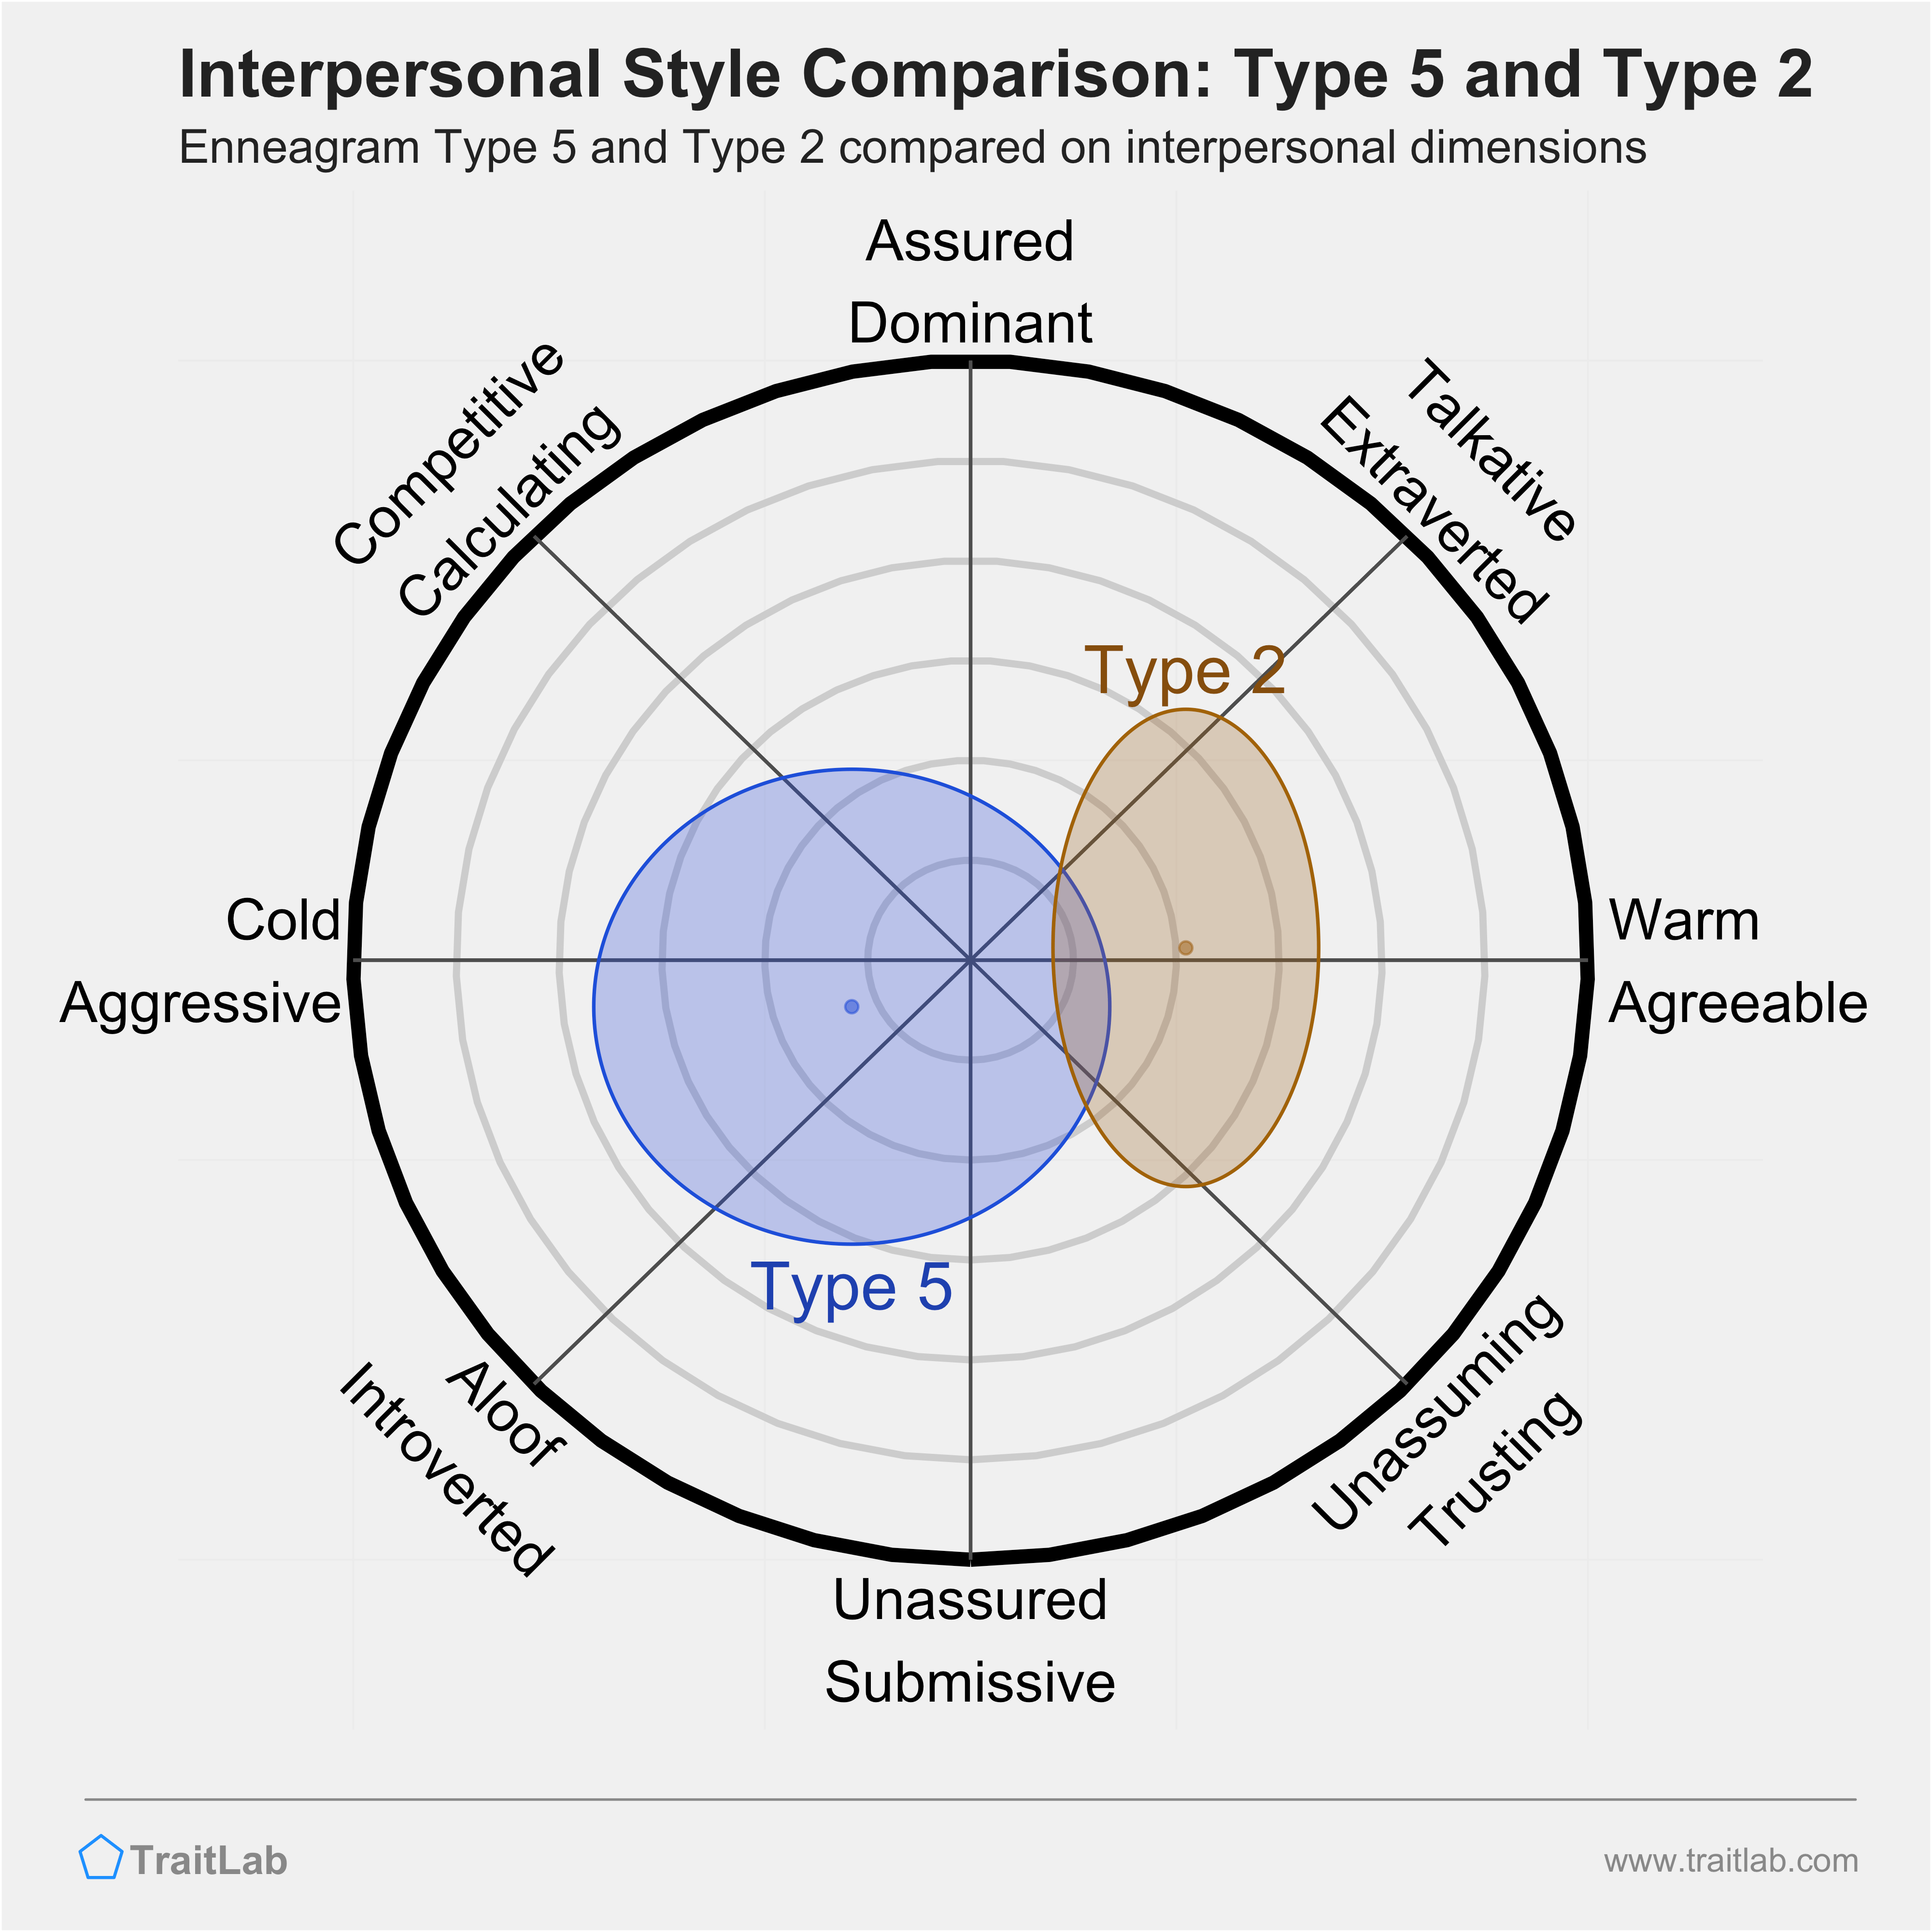 Enneagram Type 5 and Type 2 comparison across interpersonal dimensions